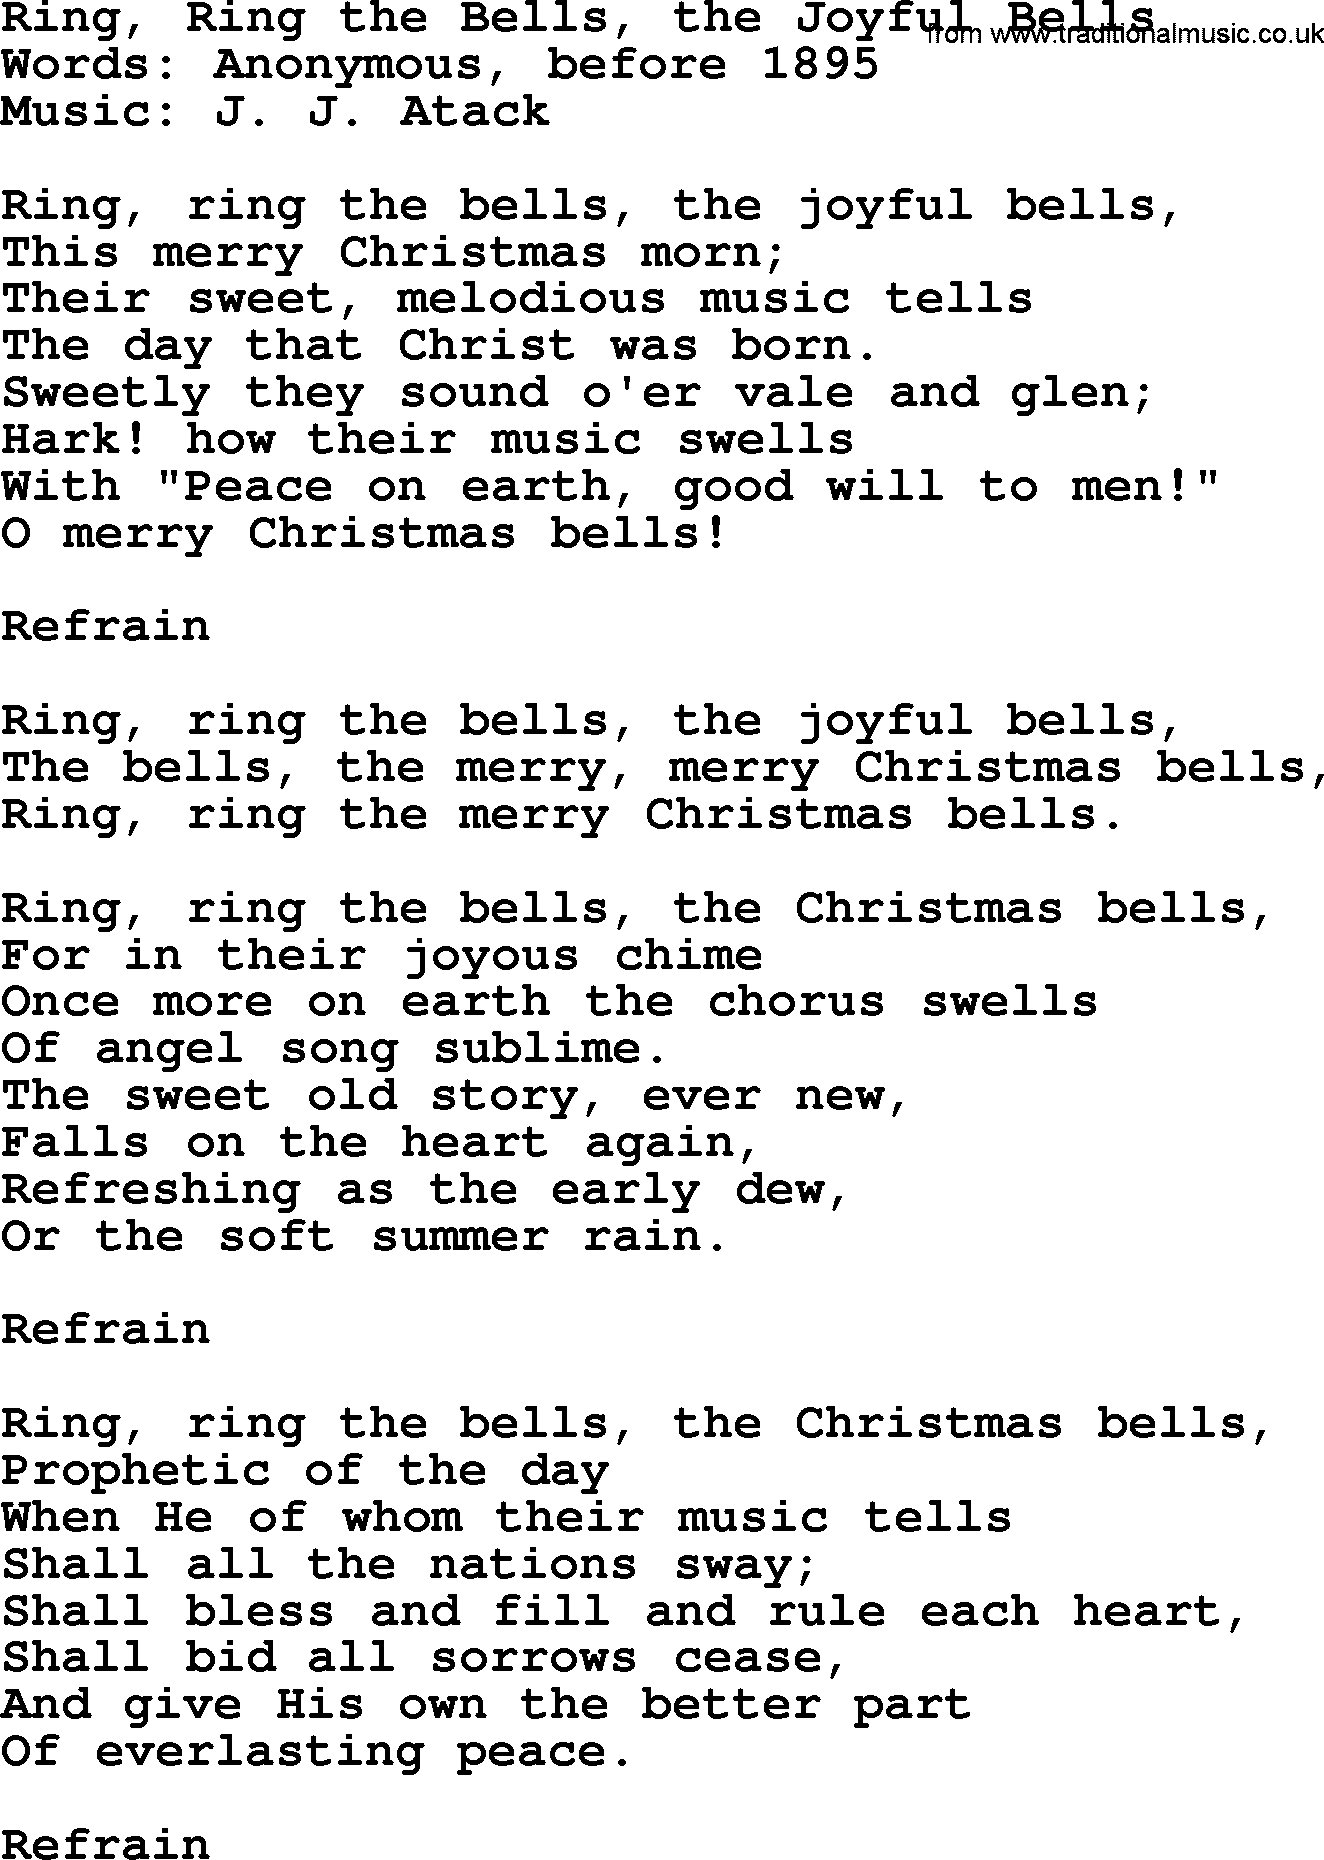 280 Christmas Hymns and songs with PowerPoints and PDF, title: Ring, Ring The Bells, The Joyful Bells, lyrics, PPT and PDF